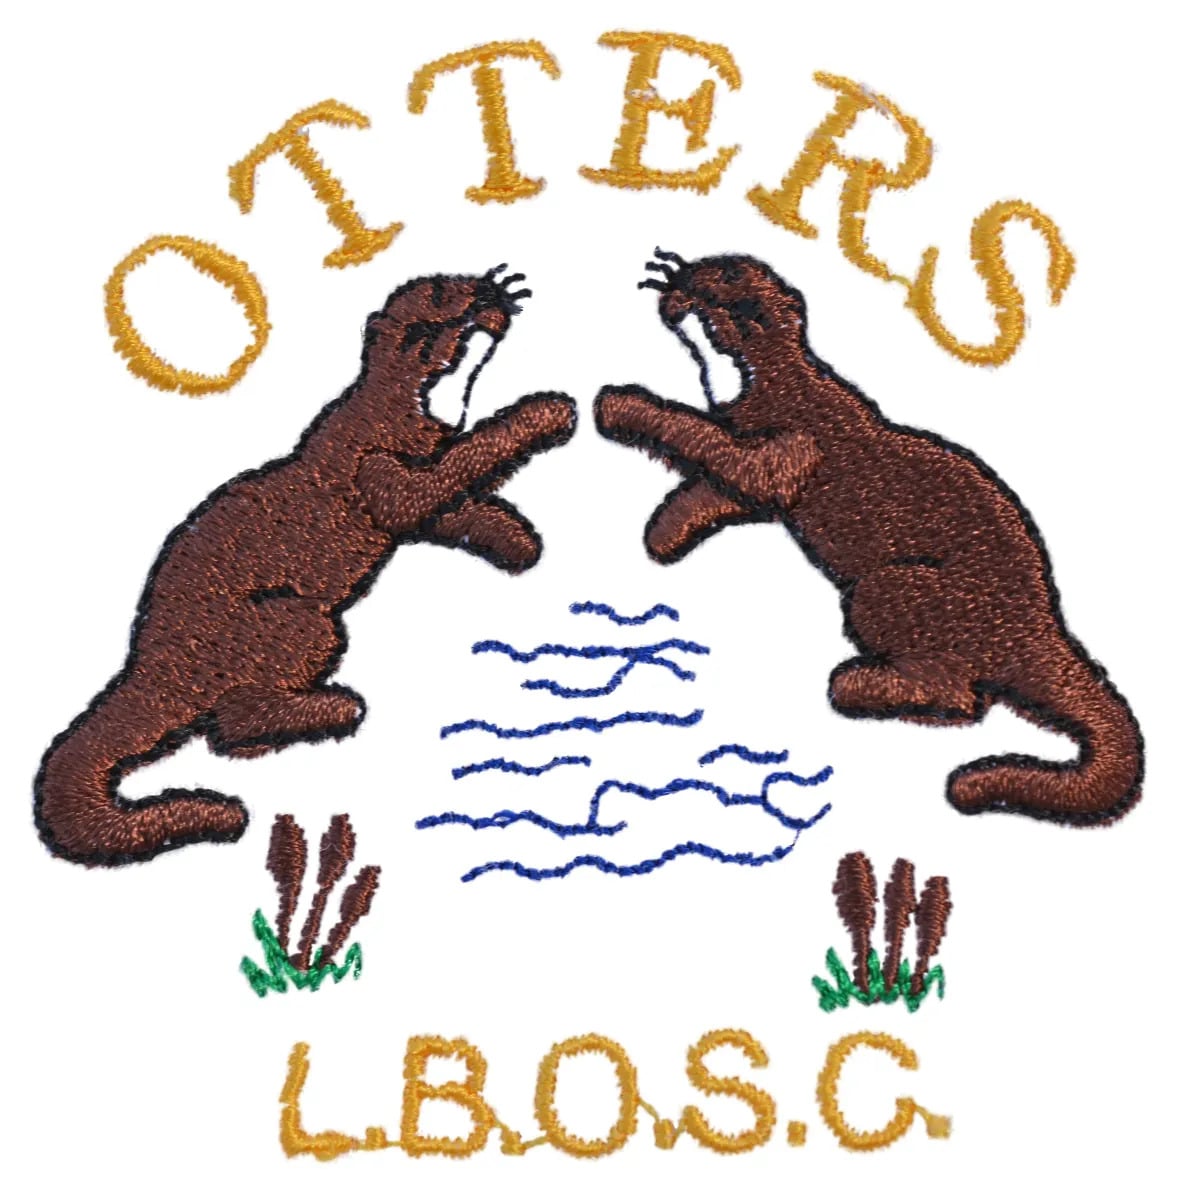 Sewn on patch logo depicting two otters for the Leighton Buzzard Otters Swimming Club